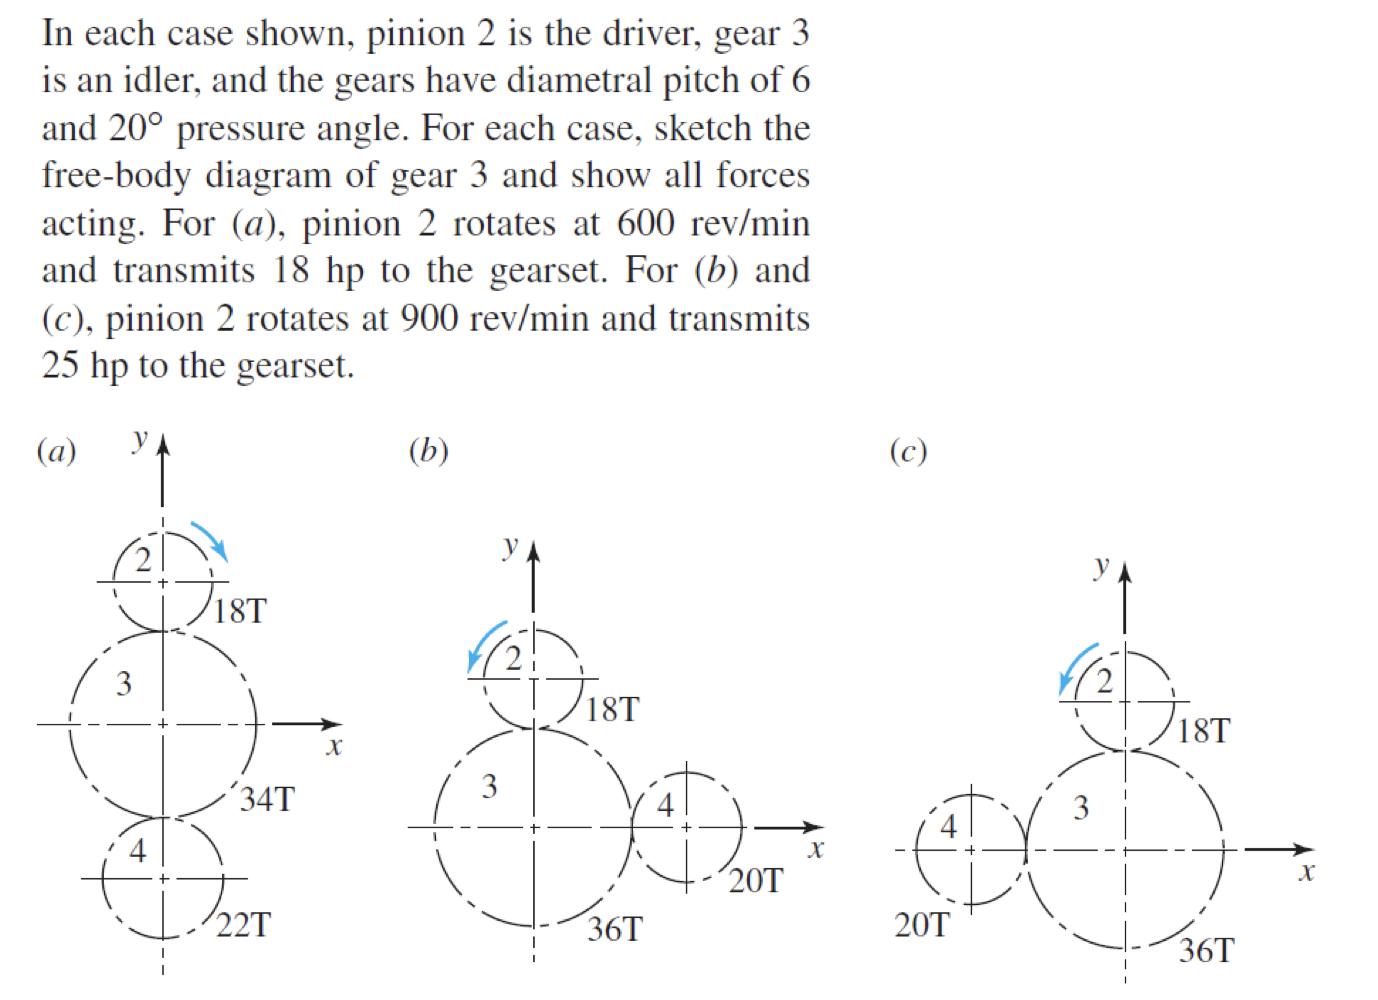 In each case shown, pinion 2 is the driver, gear 3 is an idler, and the gears have diametral pitch of 6 and